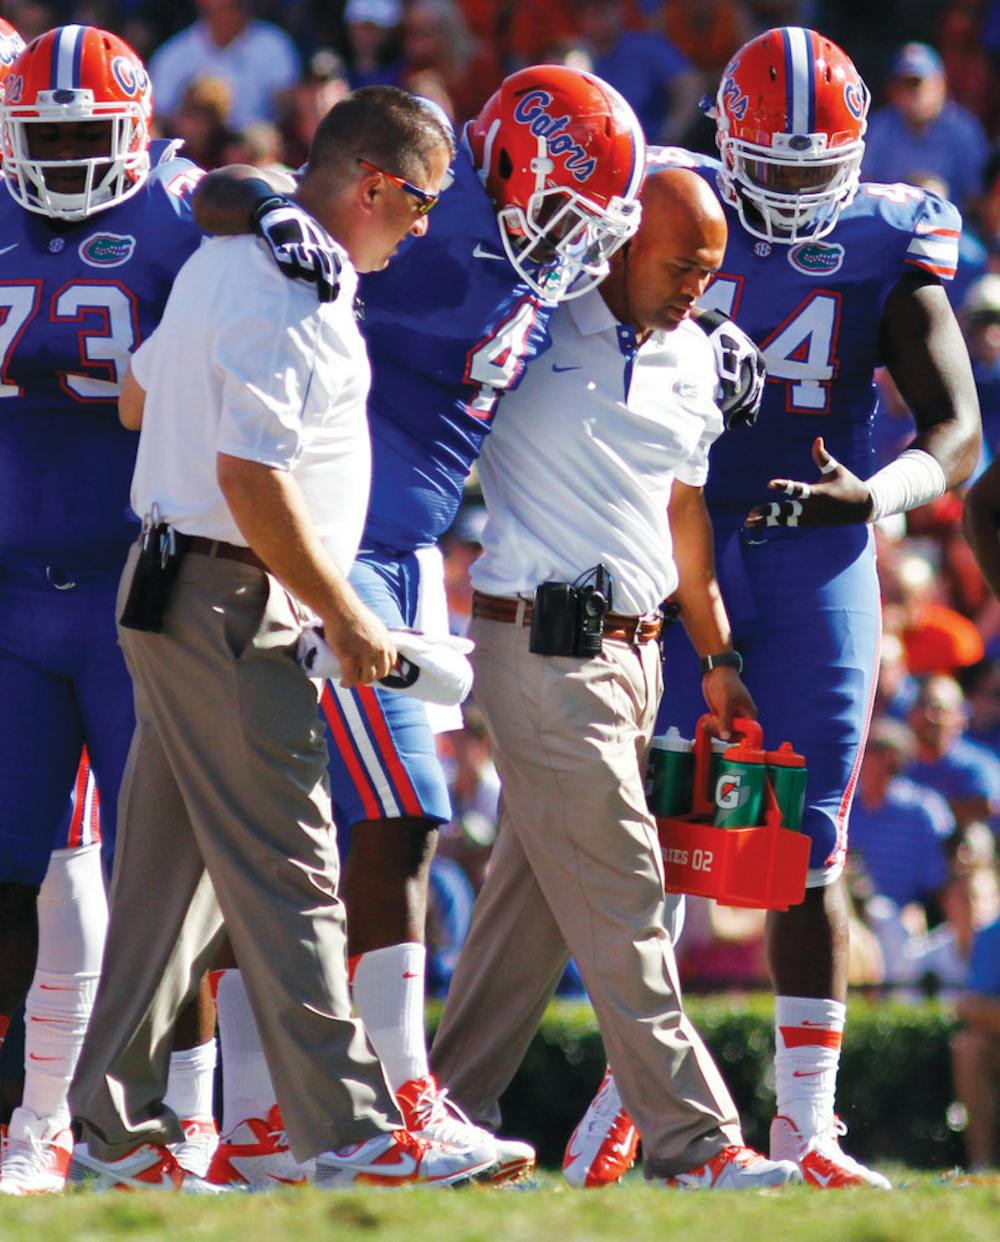 <p><span>Damien Jacobs (4) gets helped off the field during Florida’s 44-11 win against South Carolina on Saturday in The Swamp. Jacobs is expected to practice today.</span></p>
<div><span><br /></span></div>